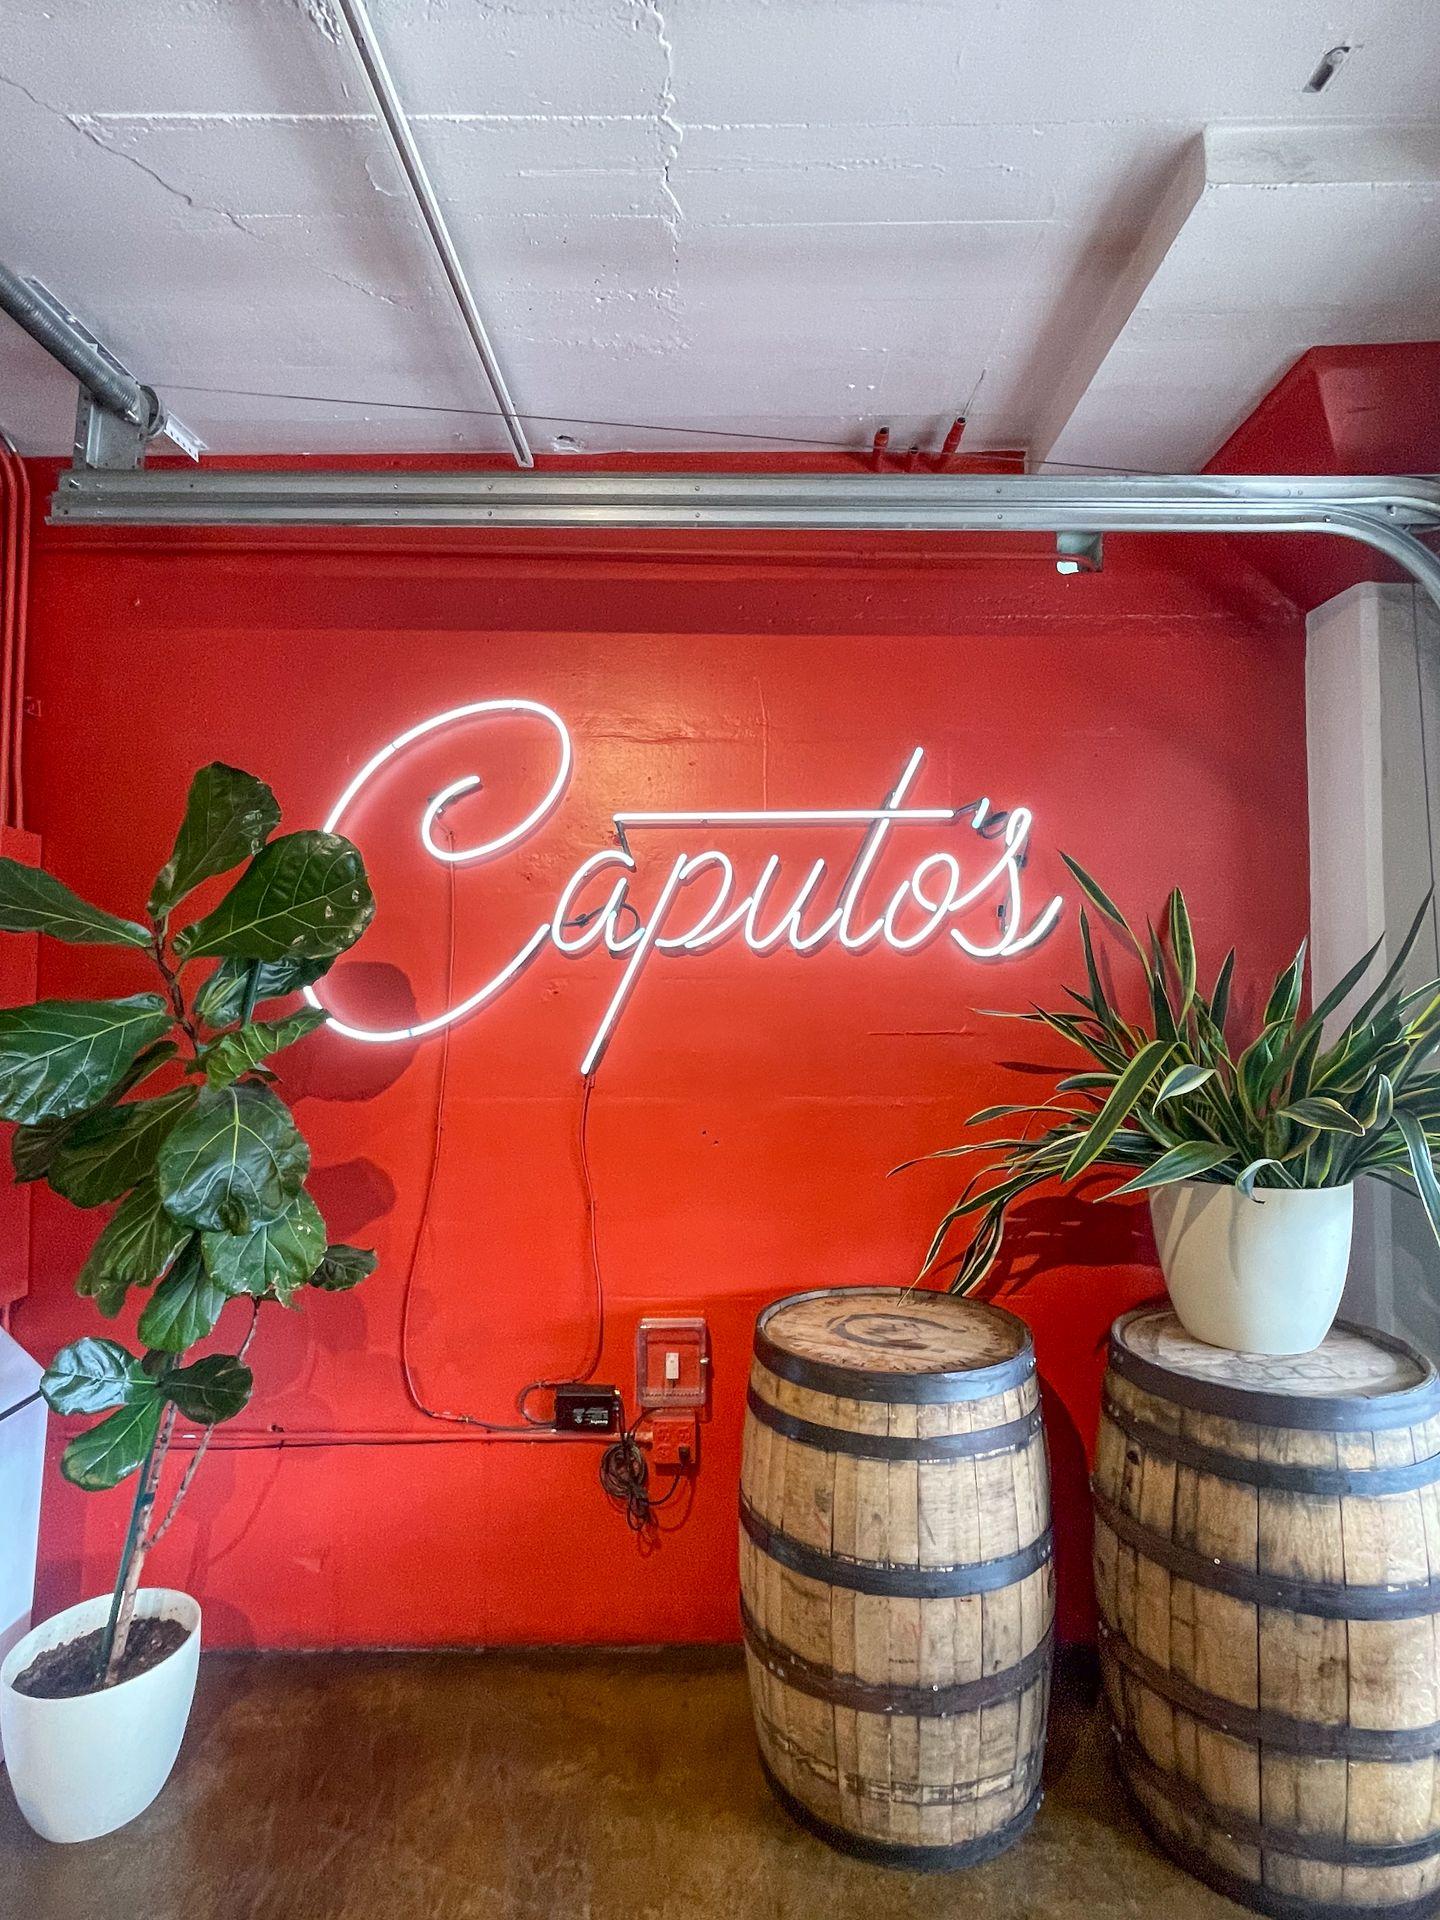 A neon Caputo's sign on a red wall